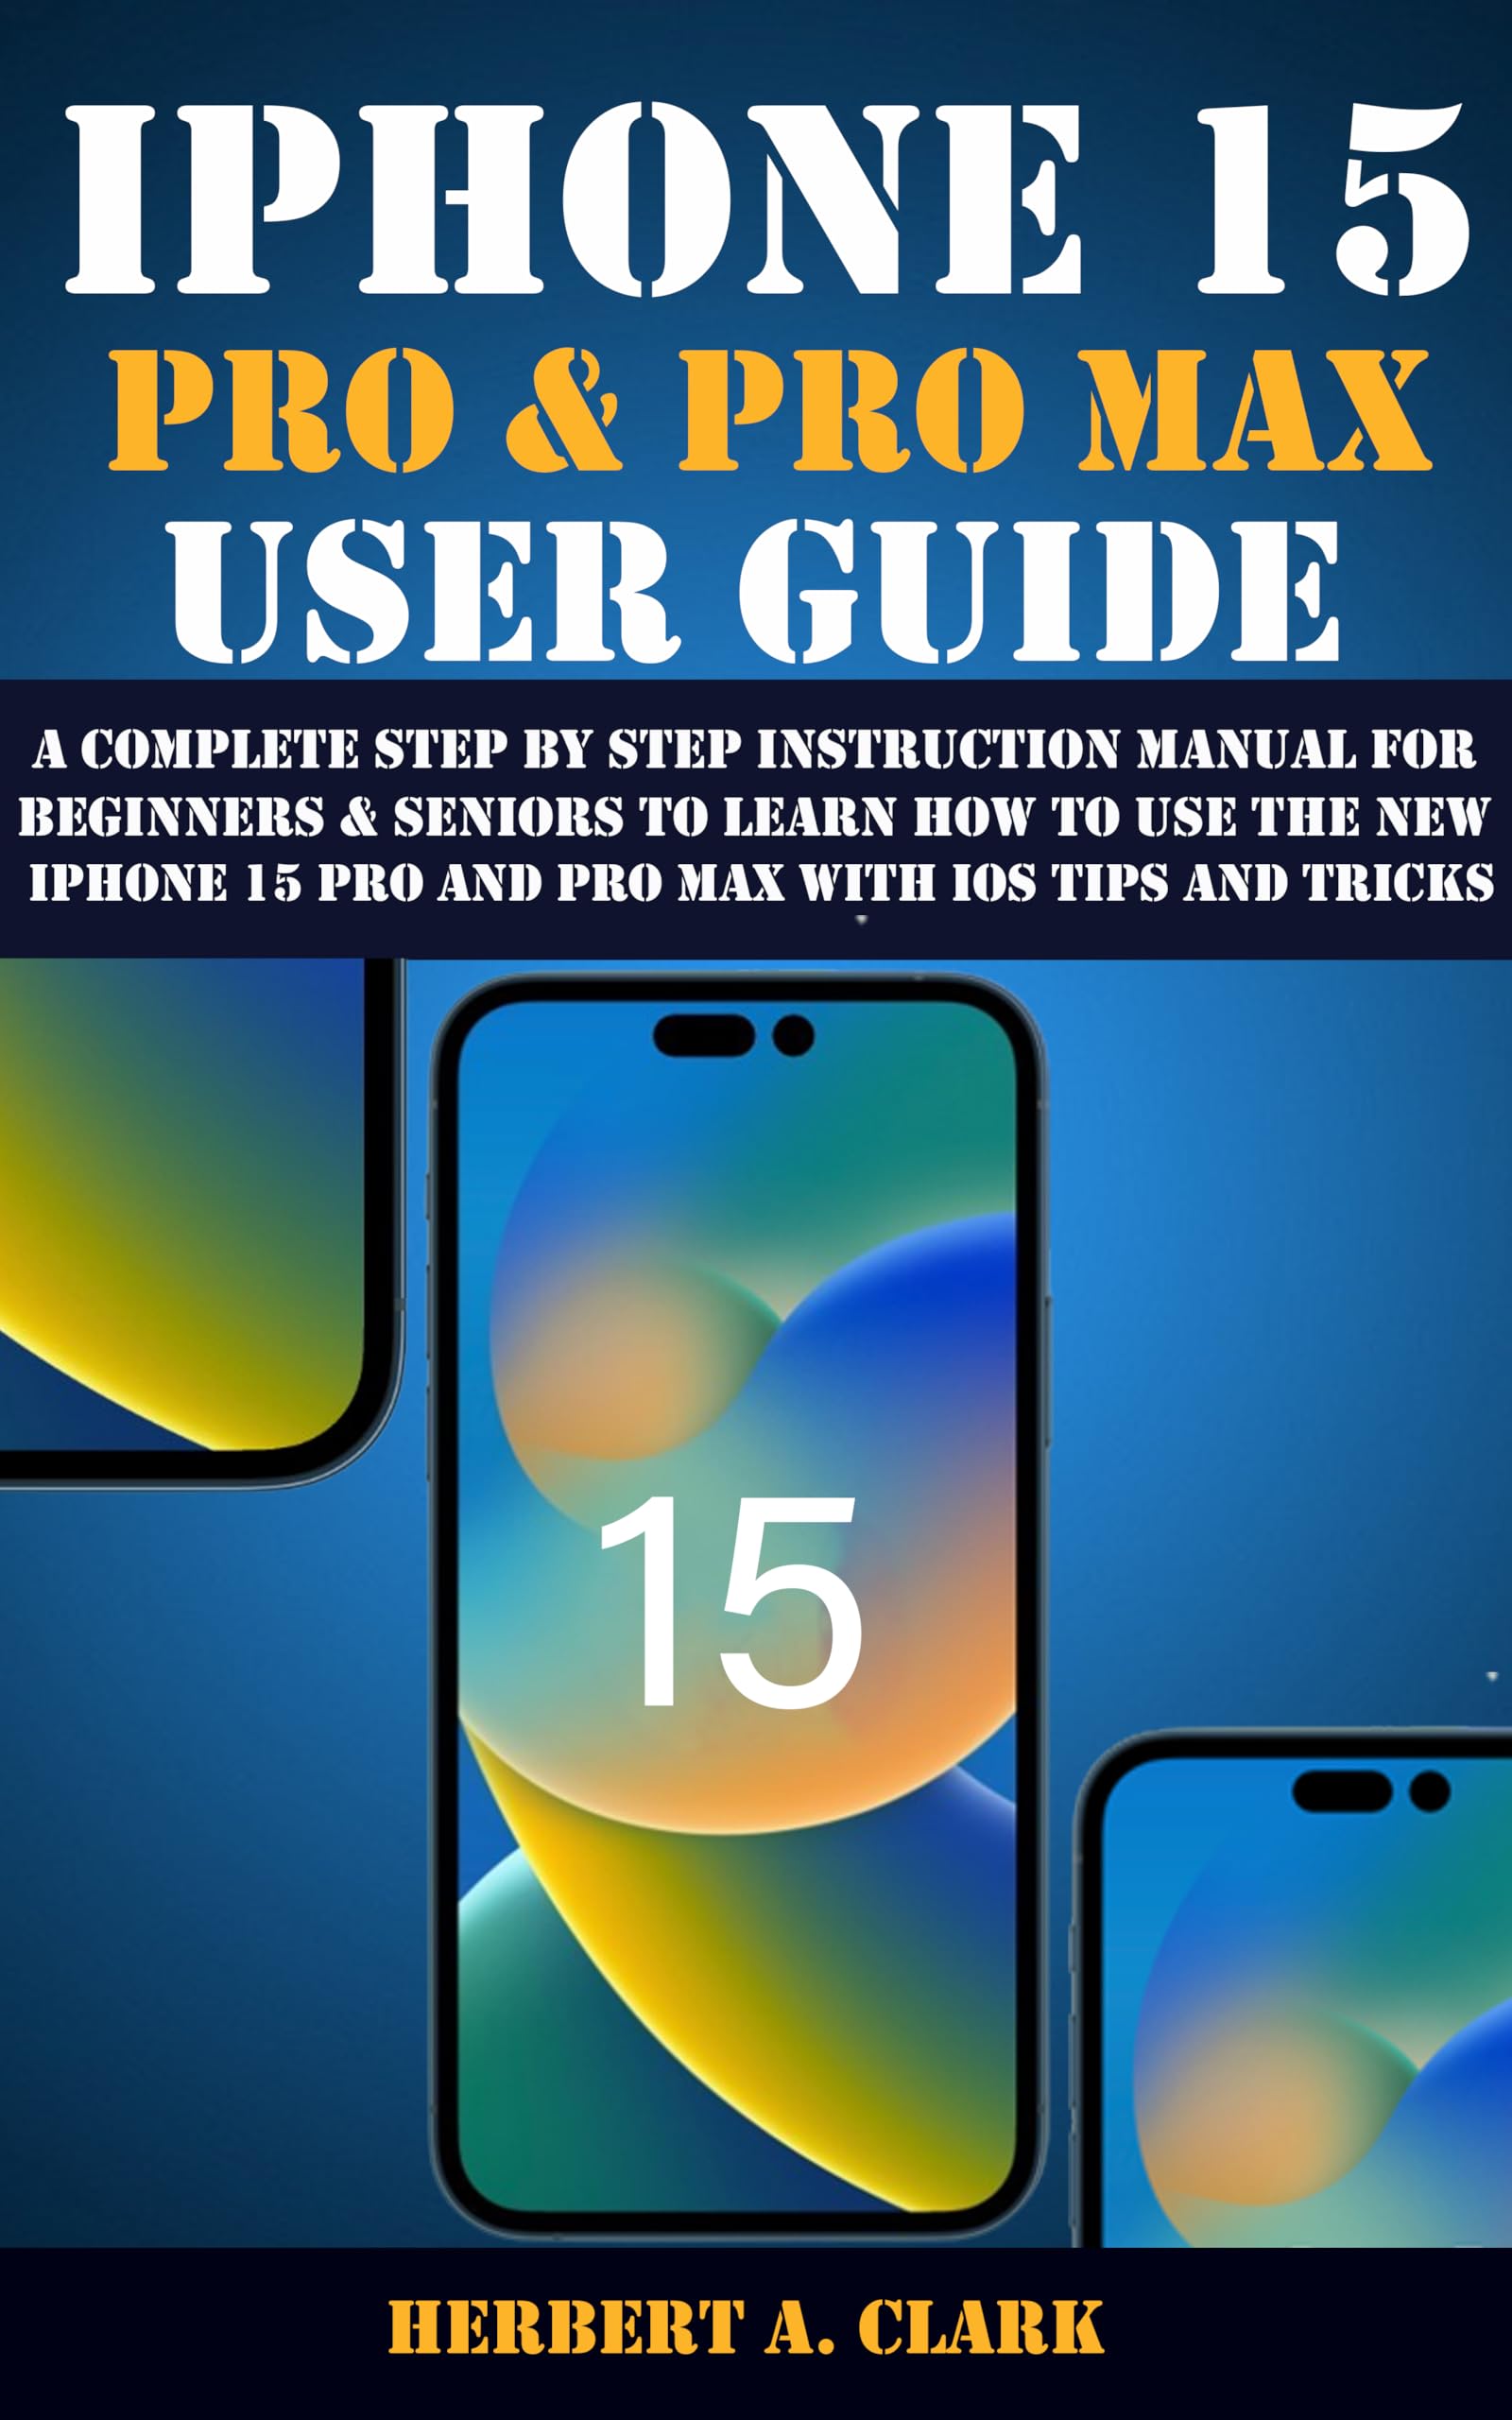 IPHONE 15 PRO & PRO MAX USER GUIDE: A Complete Step By Step Instruction Manual for Beginners & Seniors to Learn How to Use the New iPhone 15 Pro And Pro ... (Apple Device Manuals by Clark Book 2)